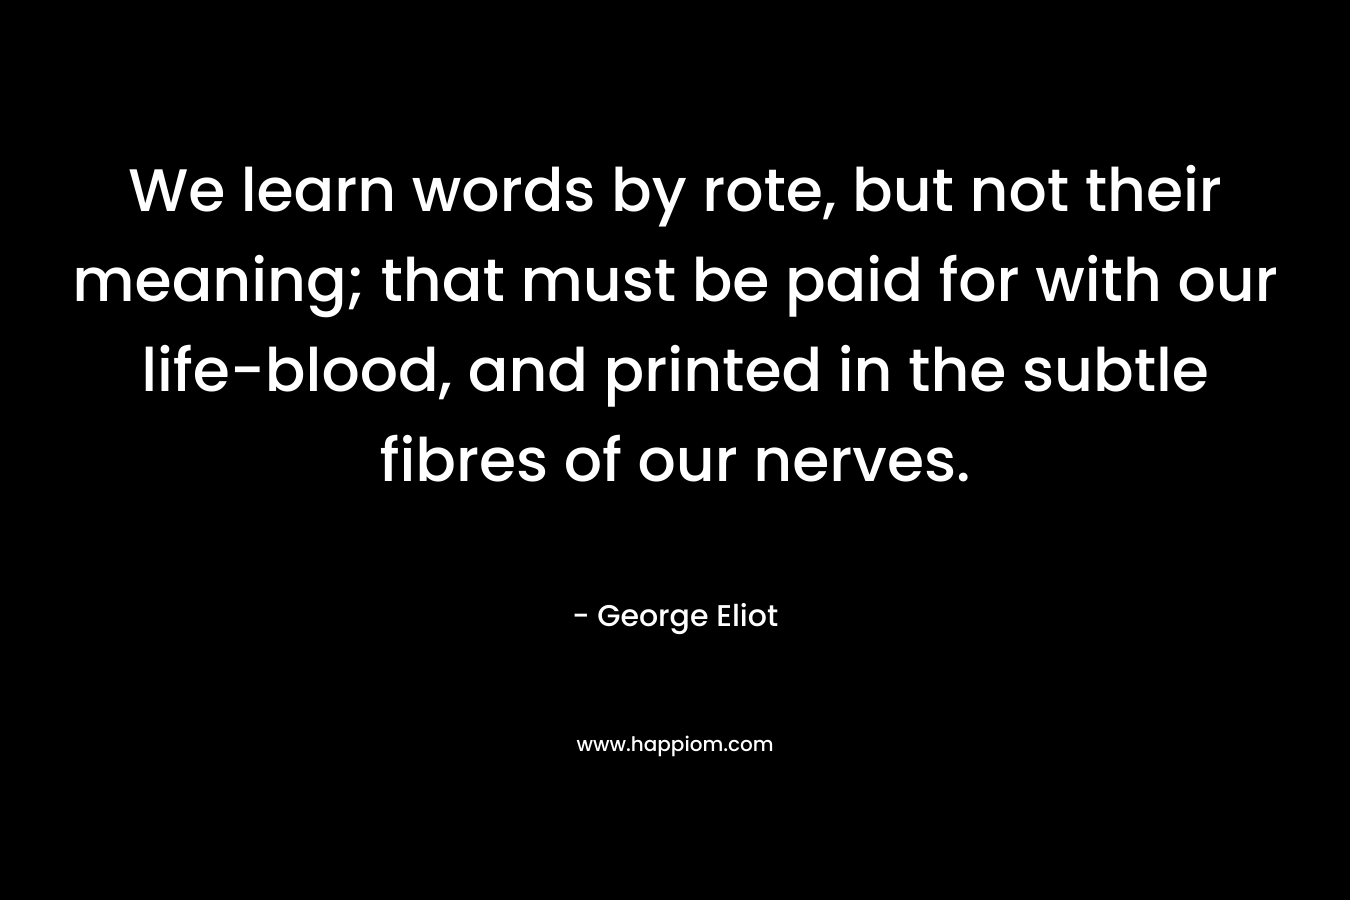 We learn words by rote, but not their meaning; that must be paid for with our life-blood, and printed in the subtle fibres of our nerves. – George Eliot